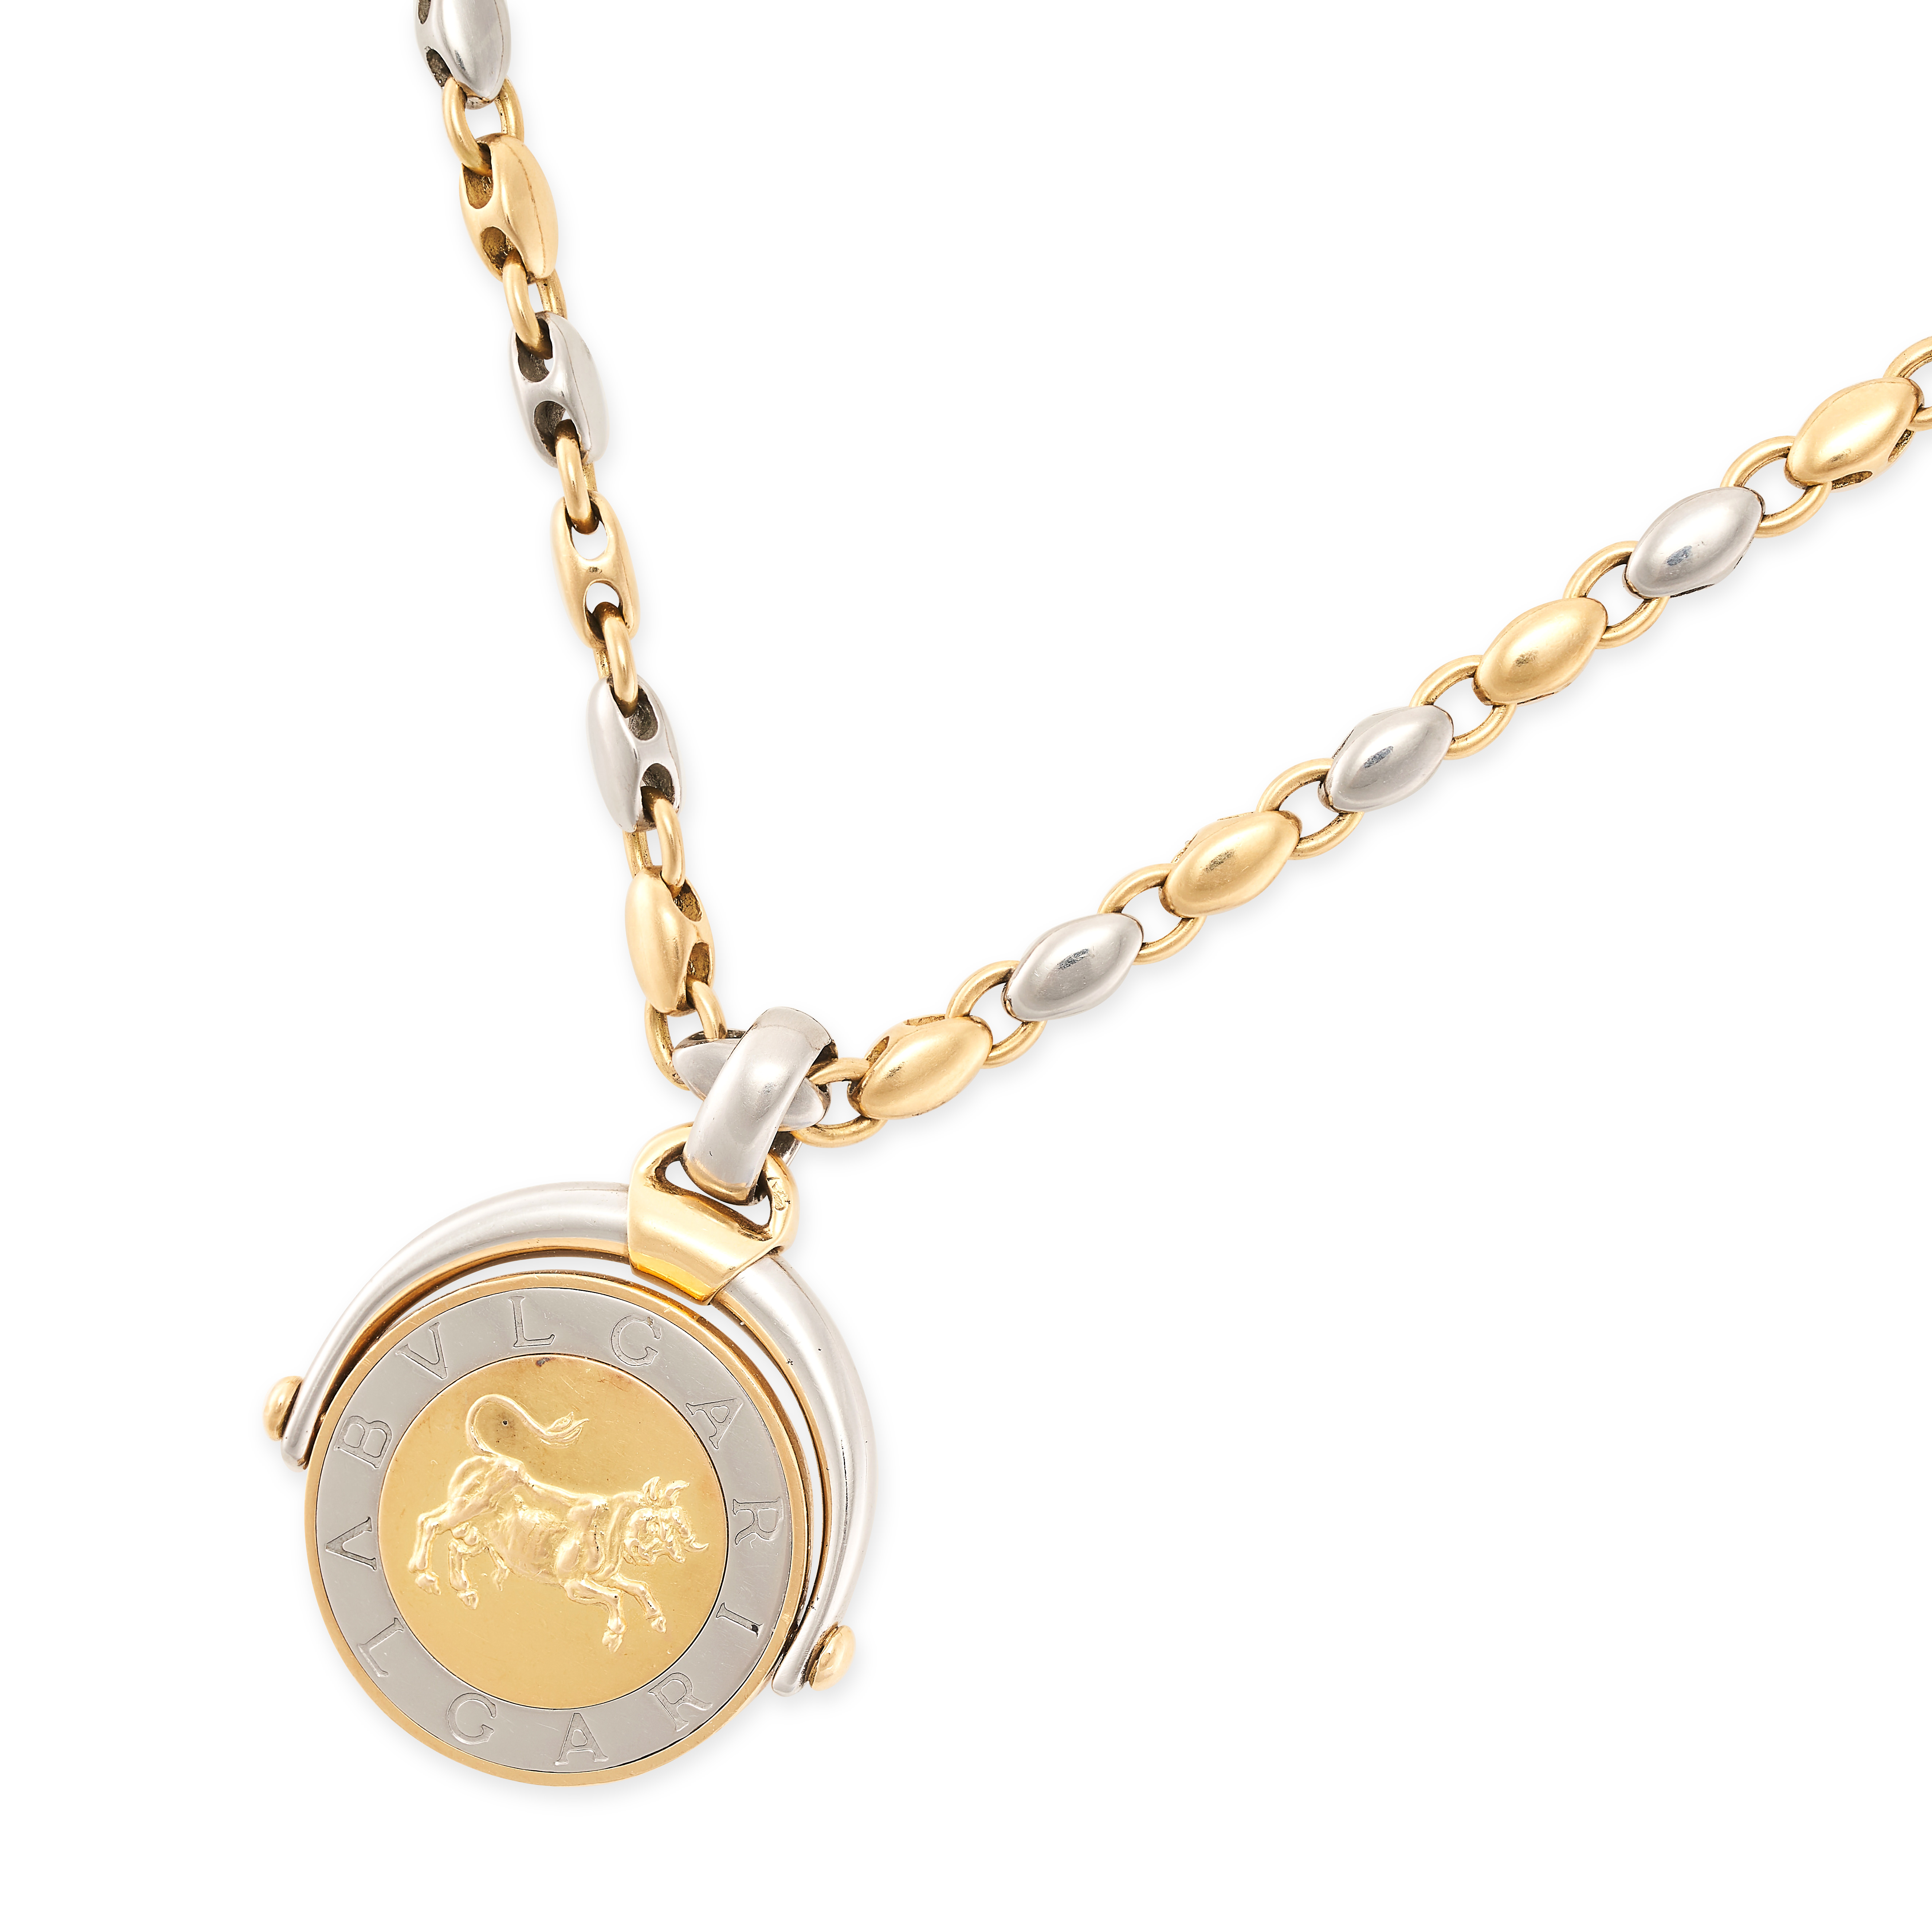 BVLGARI, A TAURUS ZODIAC COIN PENDANT NECKLACE in 18ct yellow gold and steel, comprising a